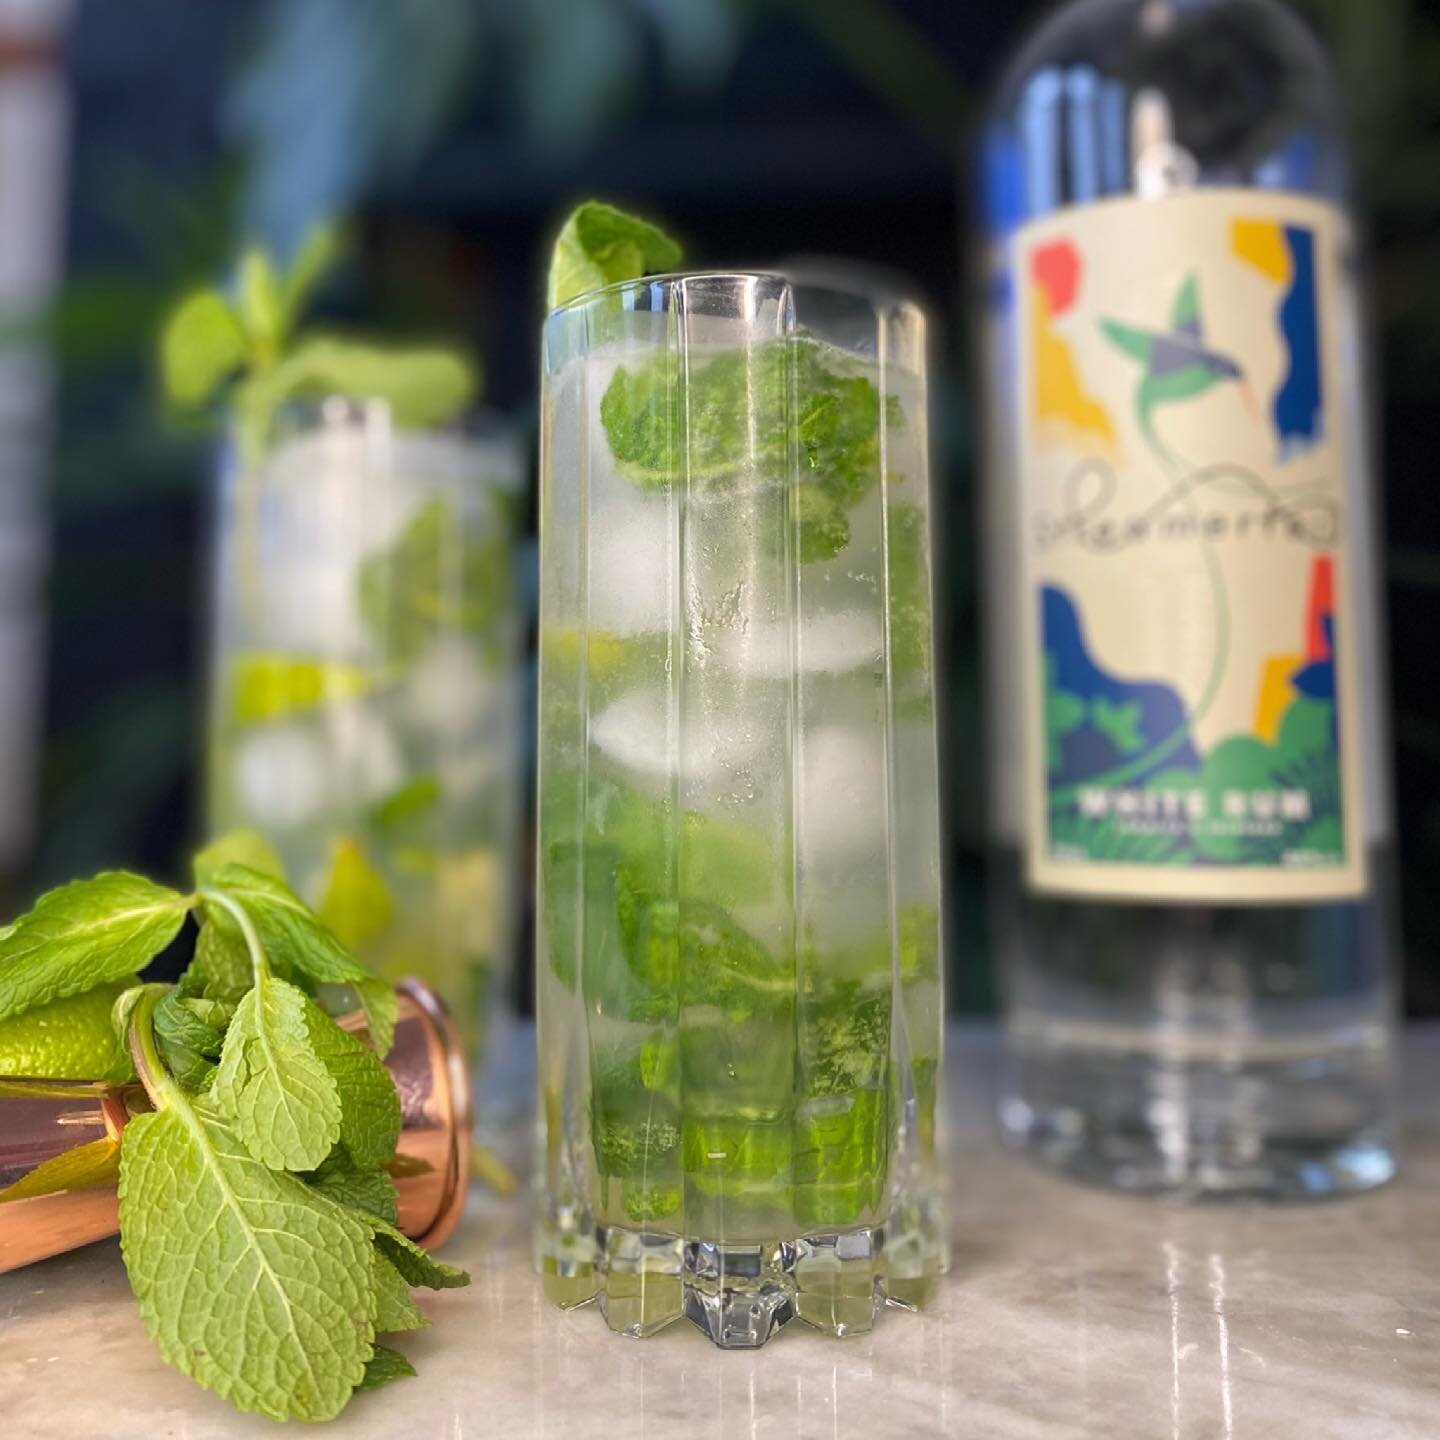 The world&rsquo;s favourite cocktail. Elevated with Streamertail. 
.
.
Can&rsquo;t wait to be knocking some of these back in the sun. ☀️🍹😎
.
.
#mojito #cocktails #drinkfluencer #rum #whiterum #london #cocktail #homebartender #summerdrinks